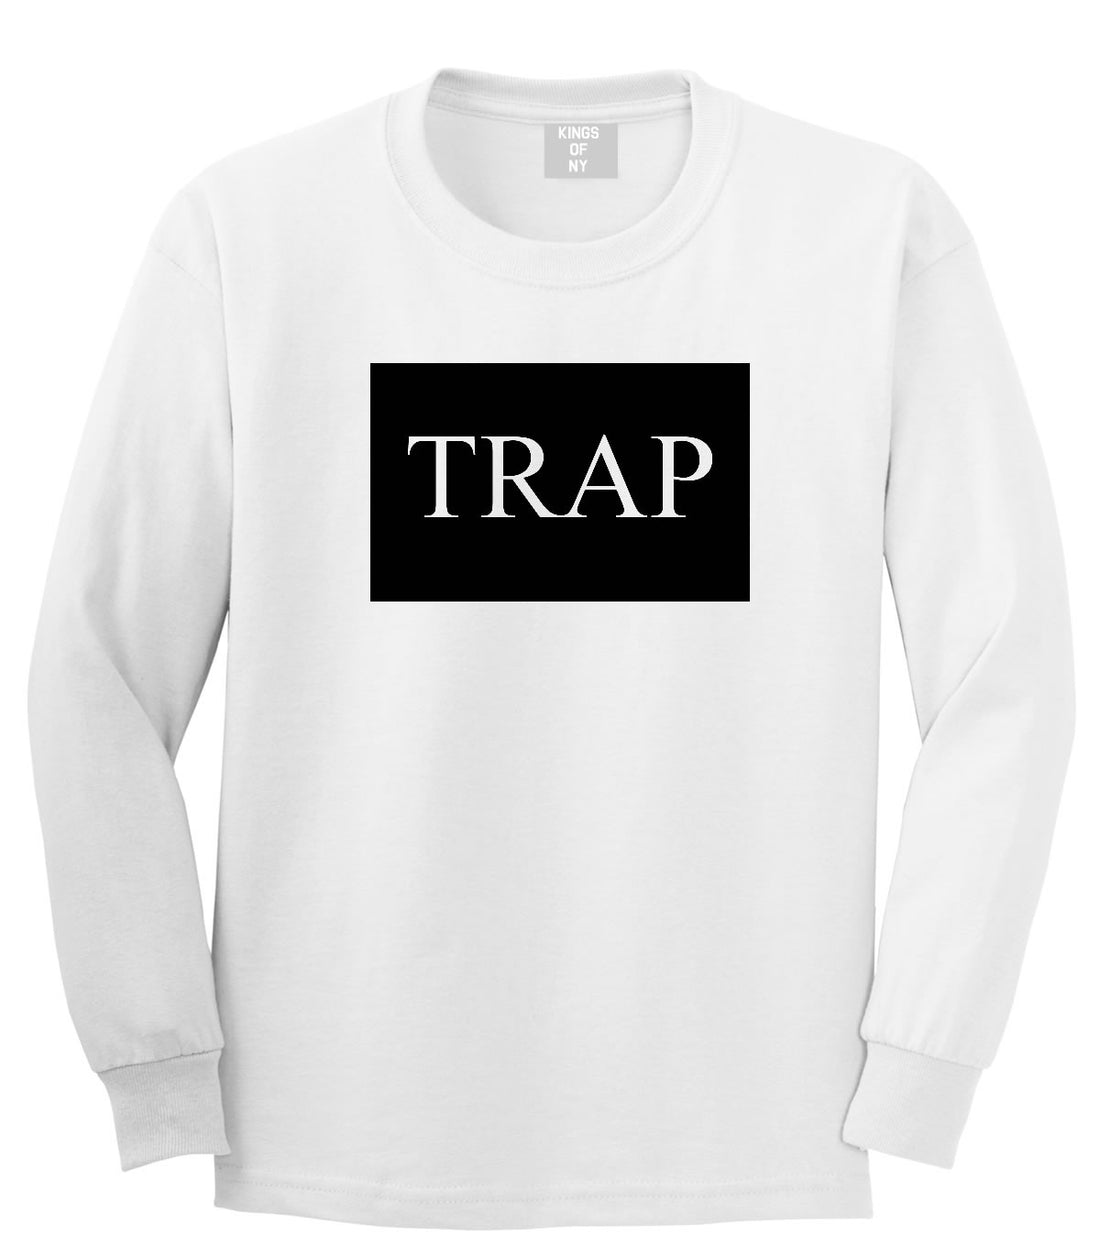 Trap Rectangle Logo Long Sleeve T-Shirt in White By Kings Of NY